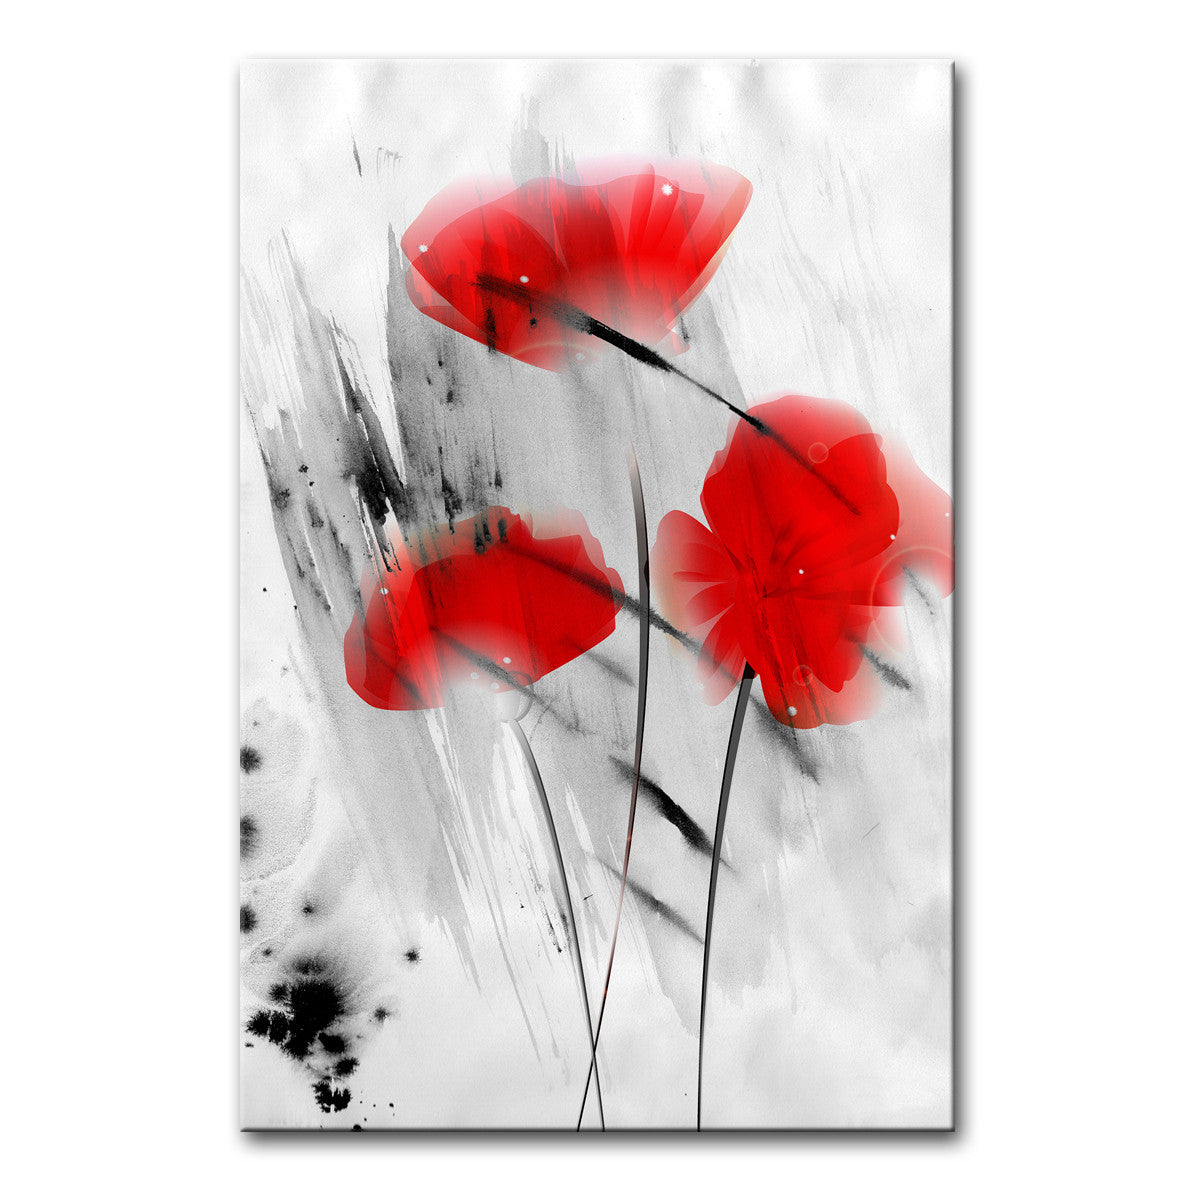 Painted Petals III' Wrapped Canvas Wall Art – Ready2HangArt